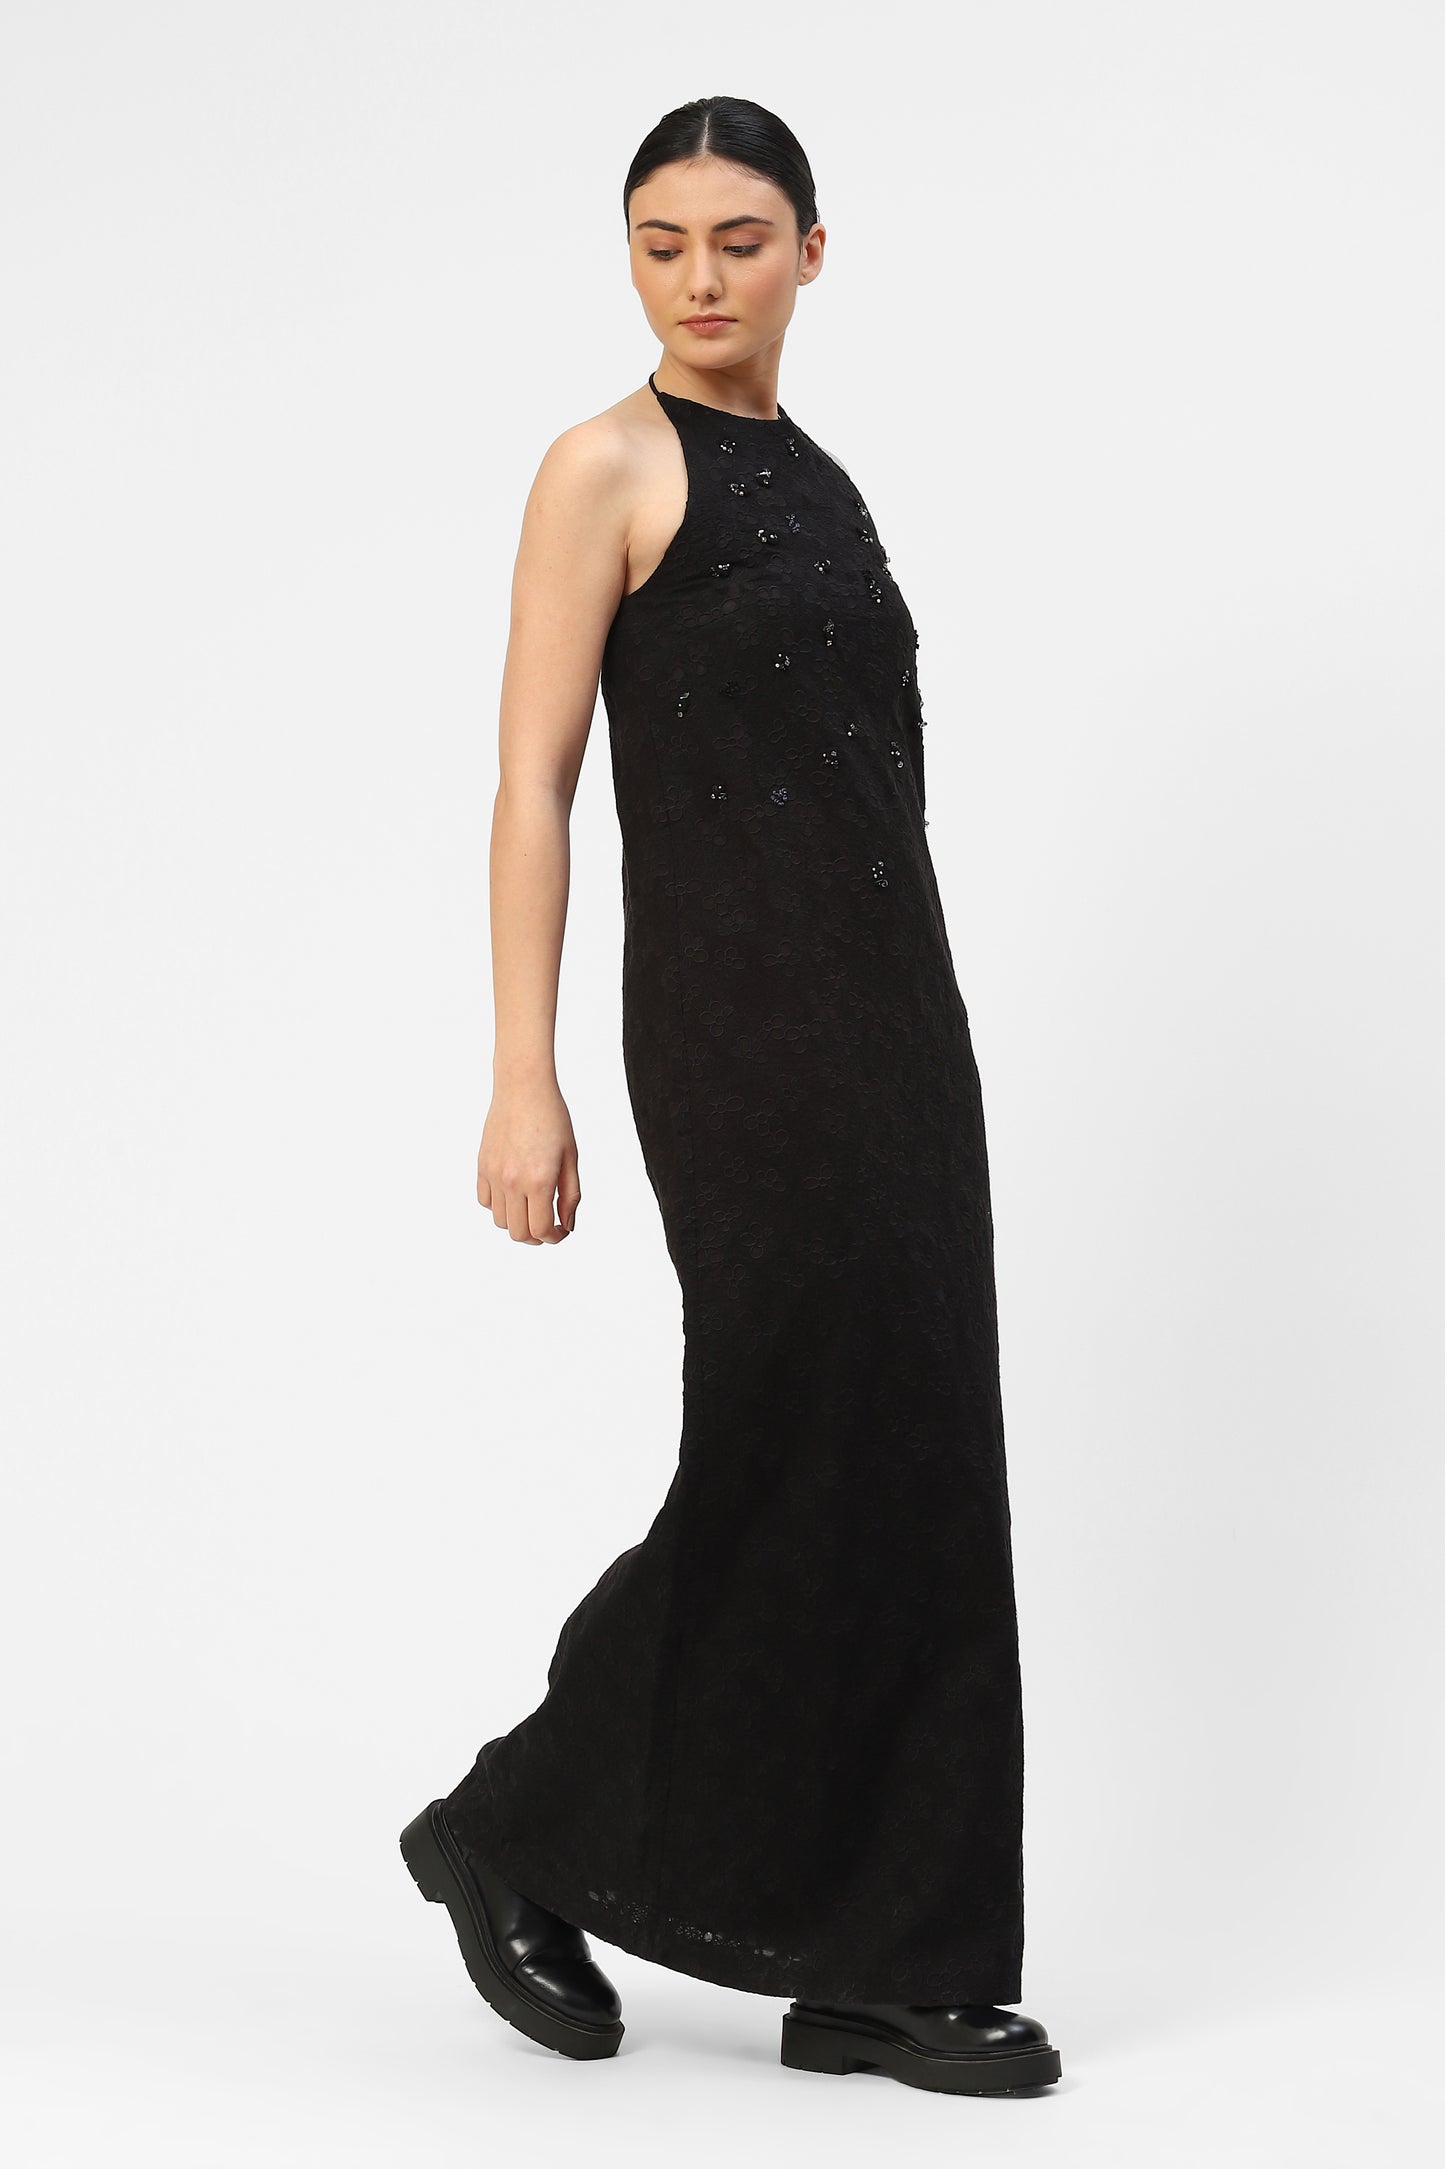 Long Embroidered Black Dress with Halter Neck